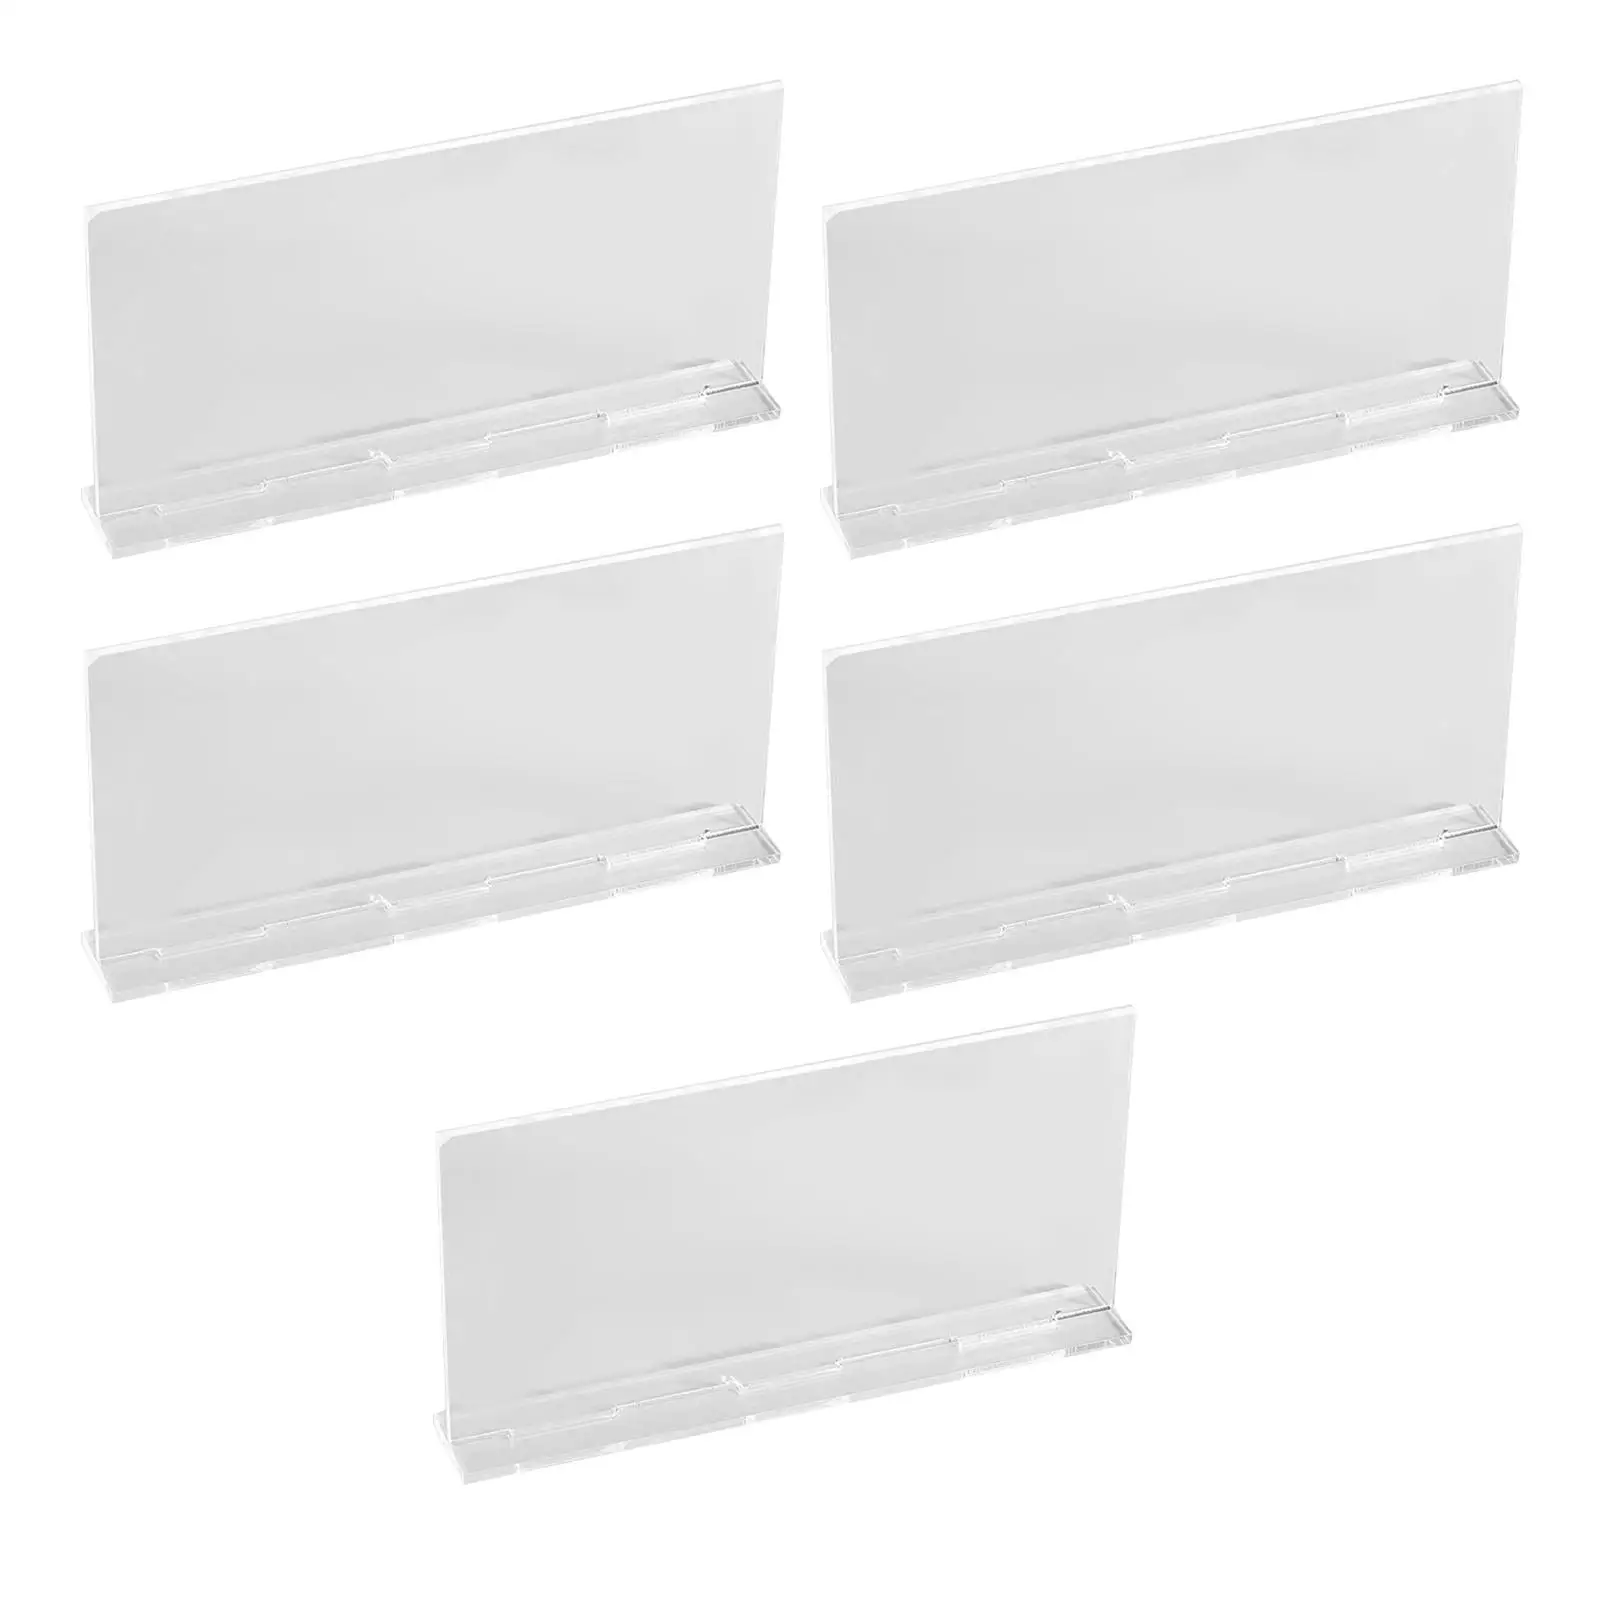 5Pcs Acrylic Place Cards Name Signs Cards for Wedding Dinner Reception Guest Party